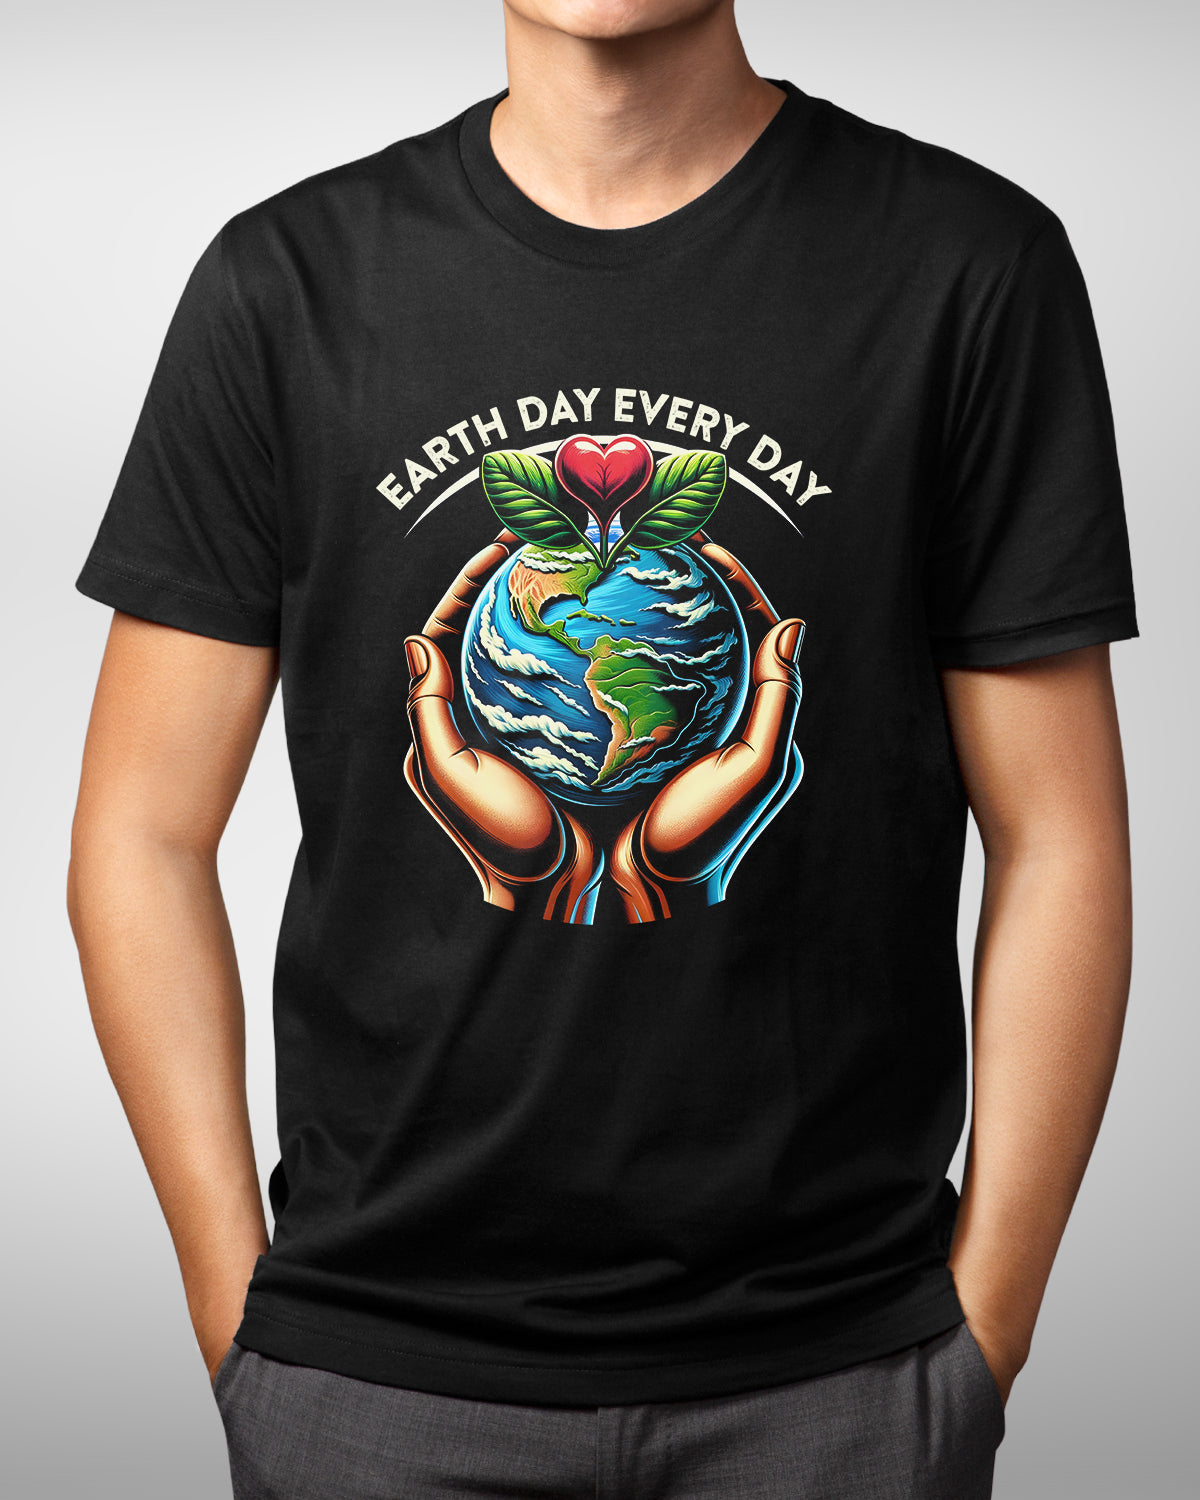 Earth Day Every Day Shirt, Climate Activist Tee, Support Nature & Environmental Awareness, Love Mother Earth